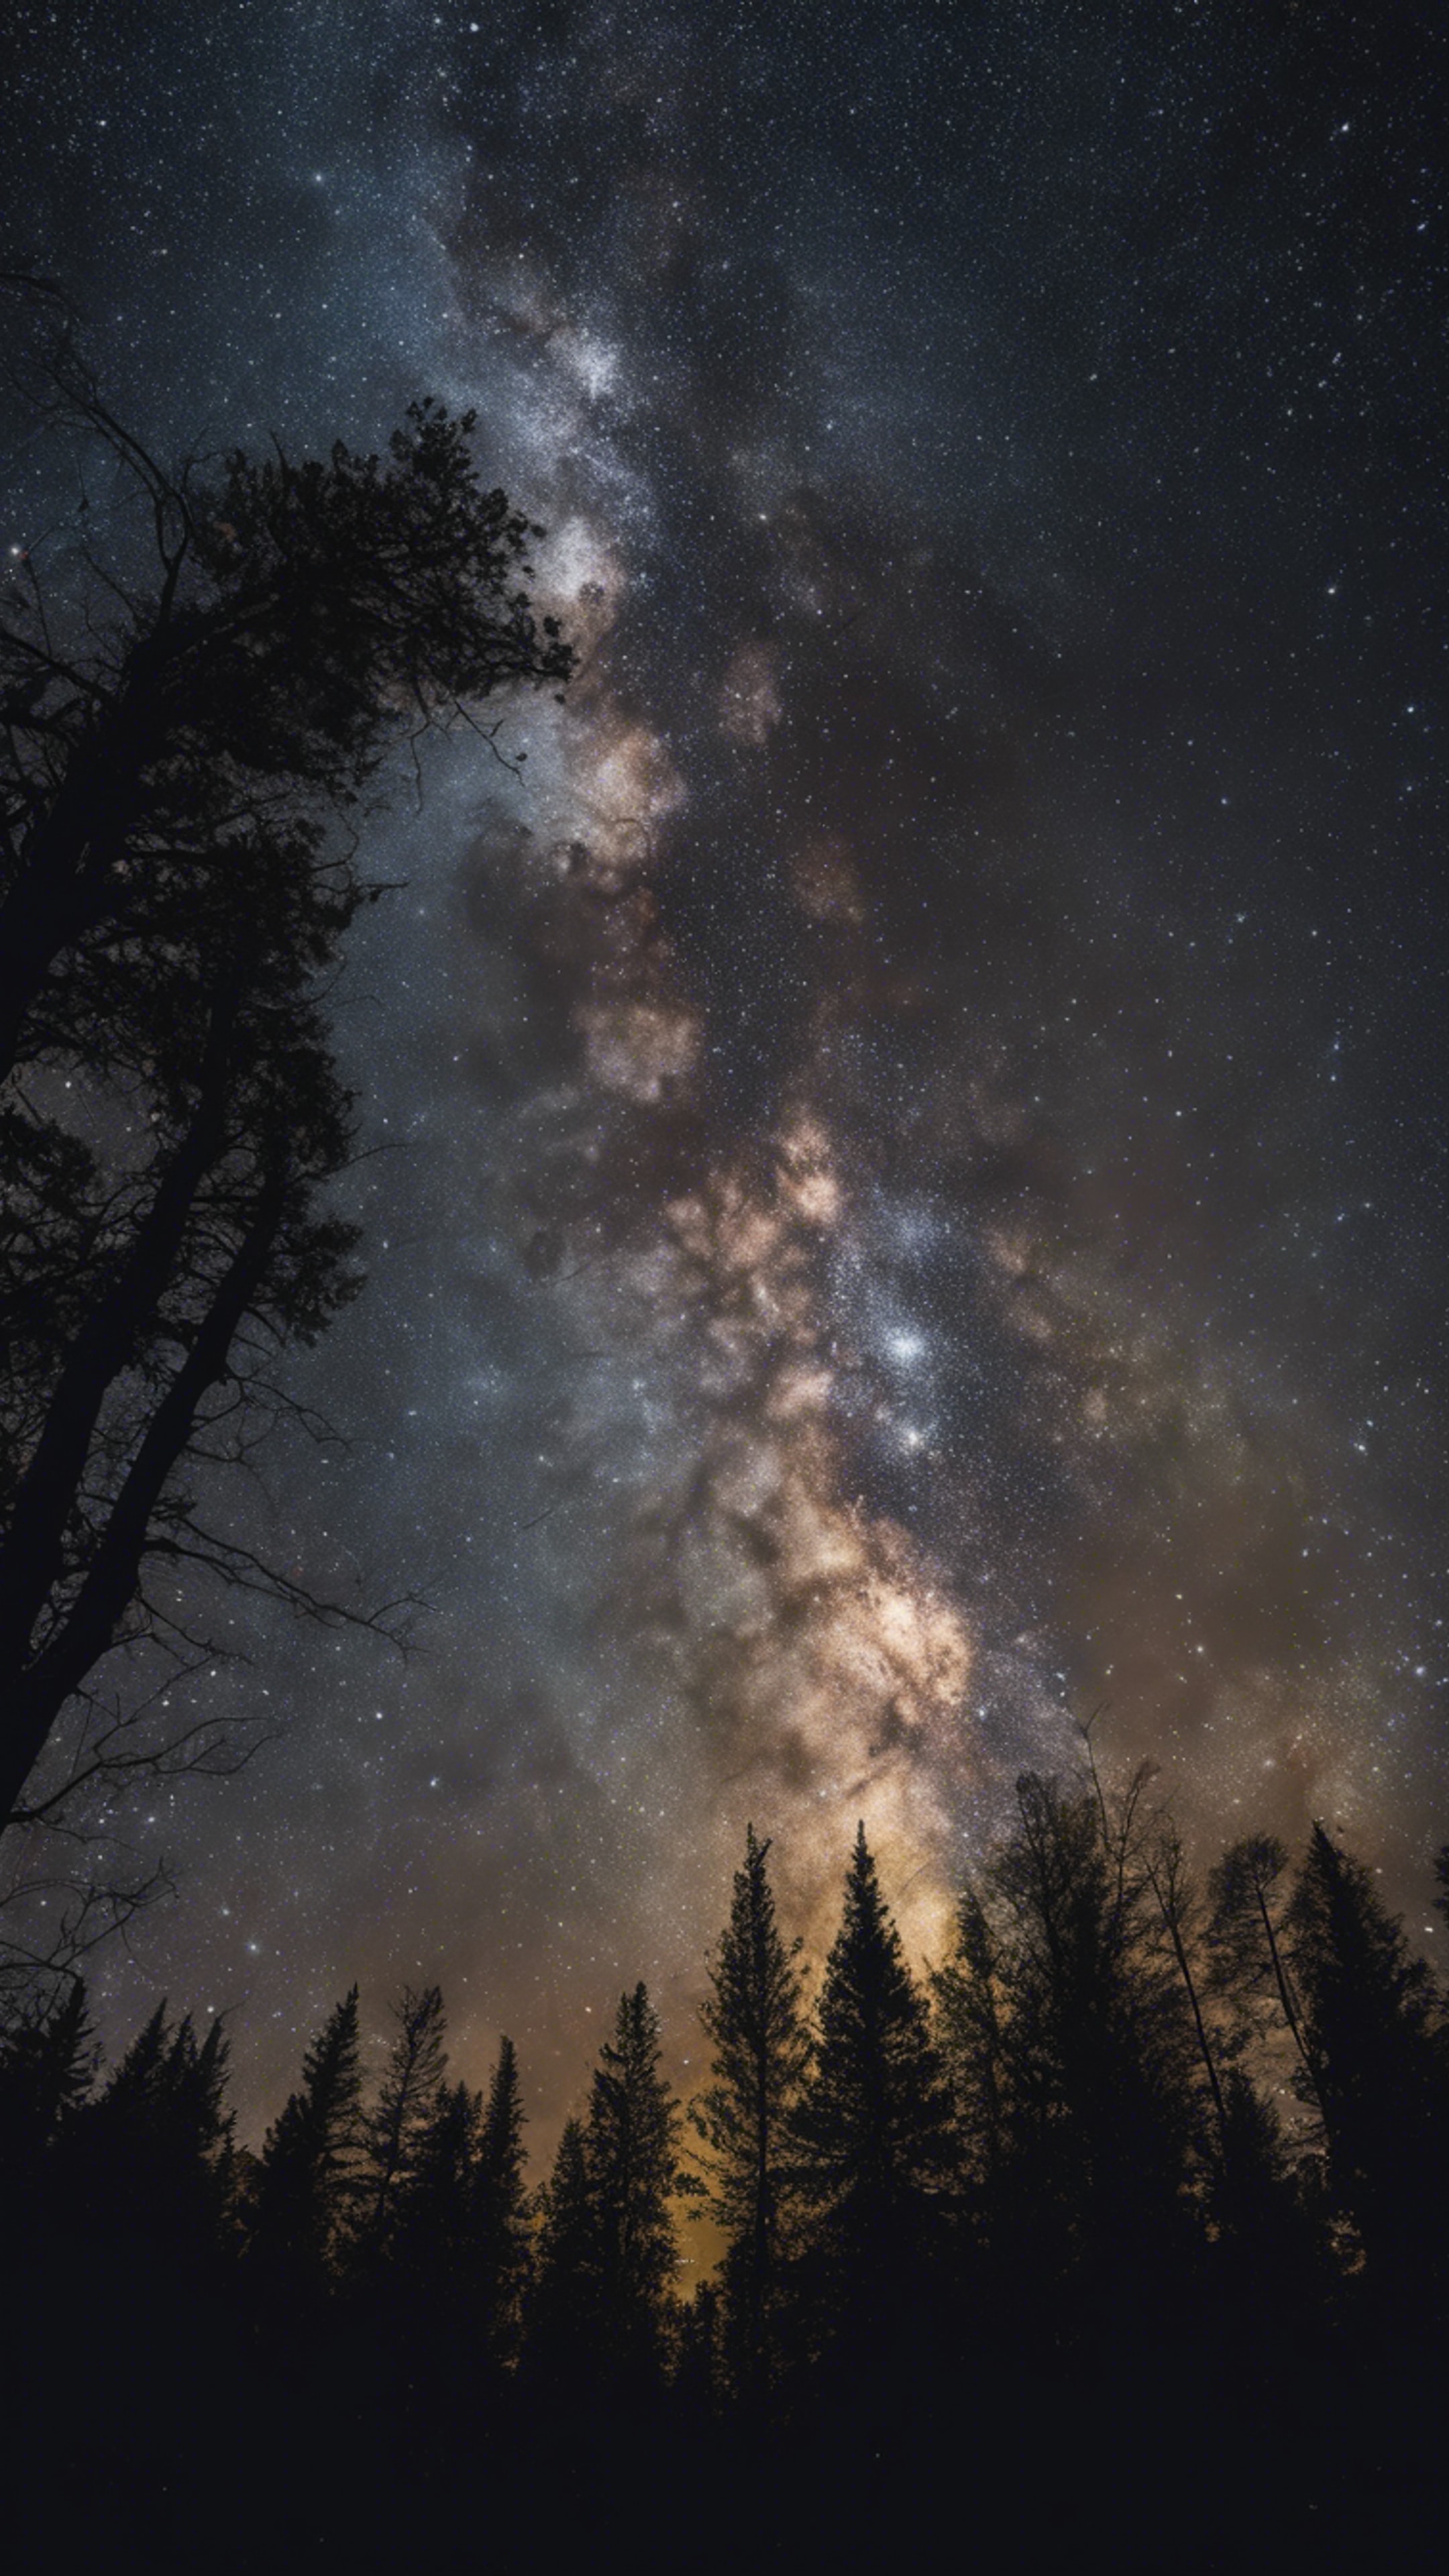 An astrophotograph showcasing the radiant Milky Way, against the contrast of a dark forest silhouette. Hình nền[89bcc876a6704e52b700]